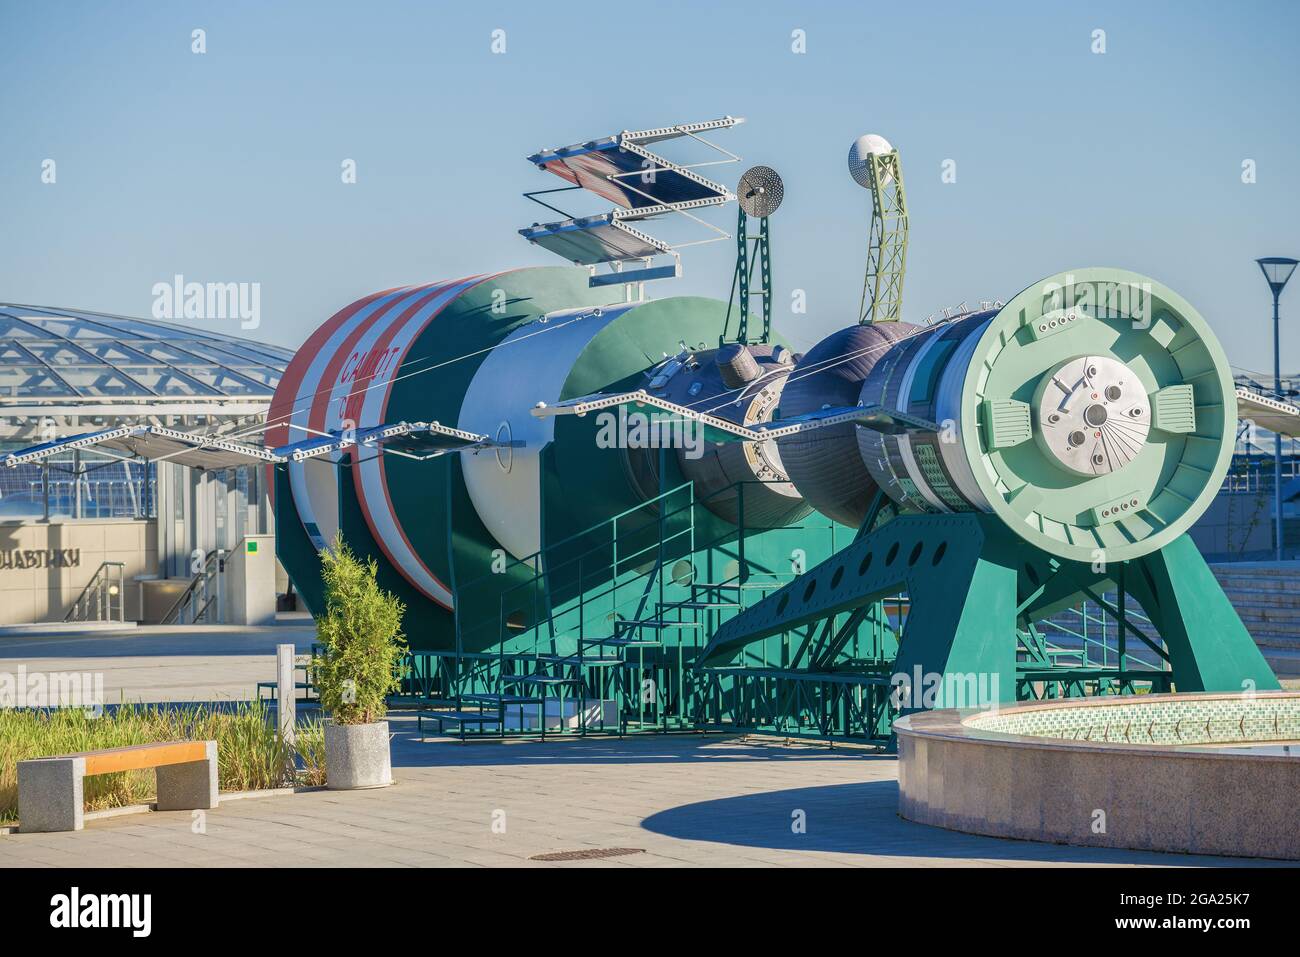 KALUGA, RUSSIA - JULY 07, 2021: Two space stations Salyut and Soyuz on the State Museum of Cosmonautics Stock Photo